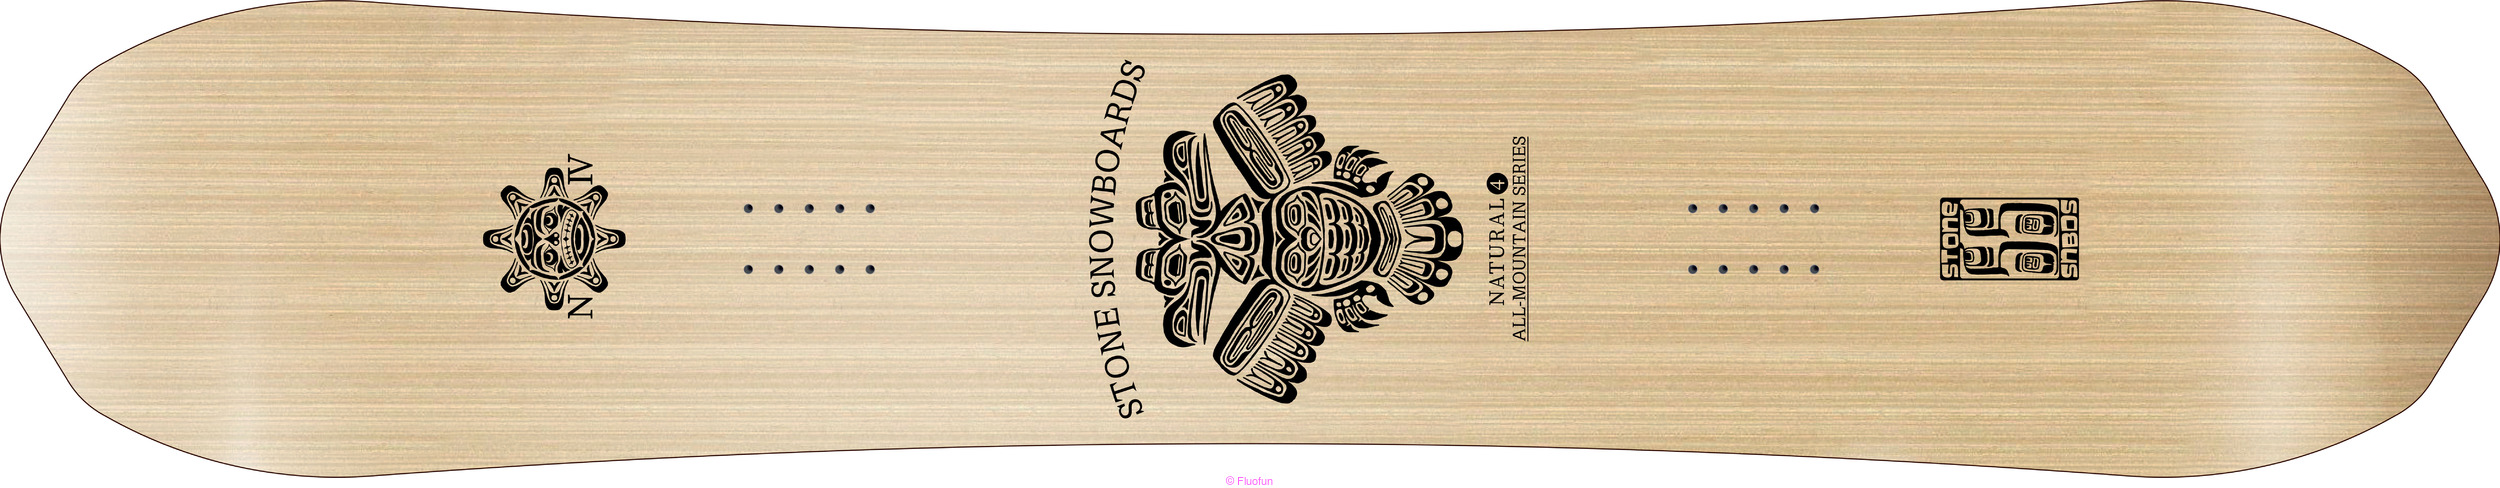 Stone snowboards NATURAL